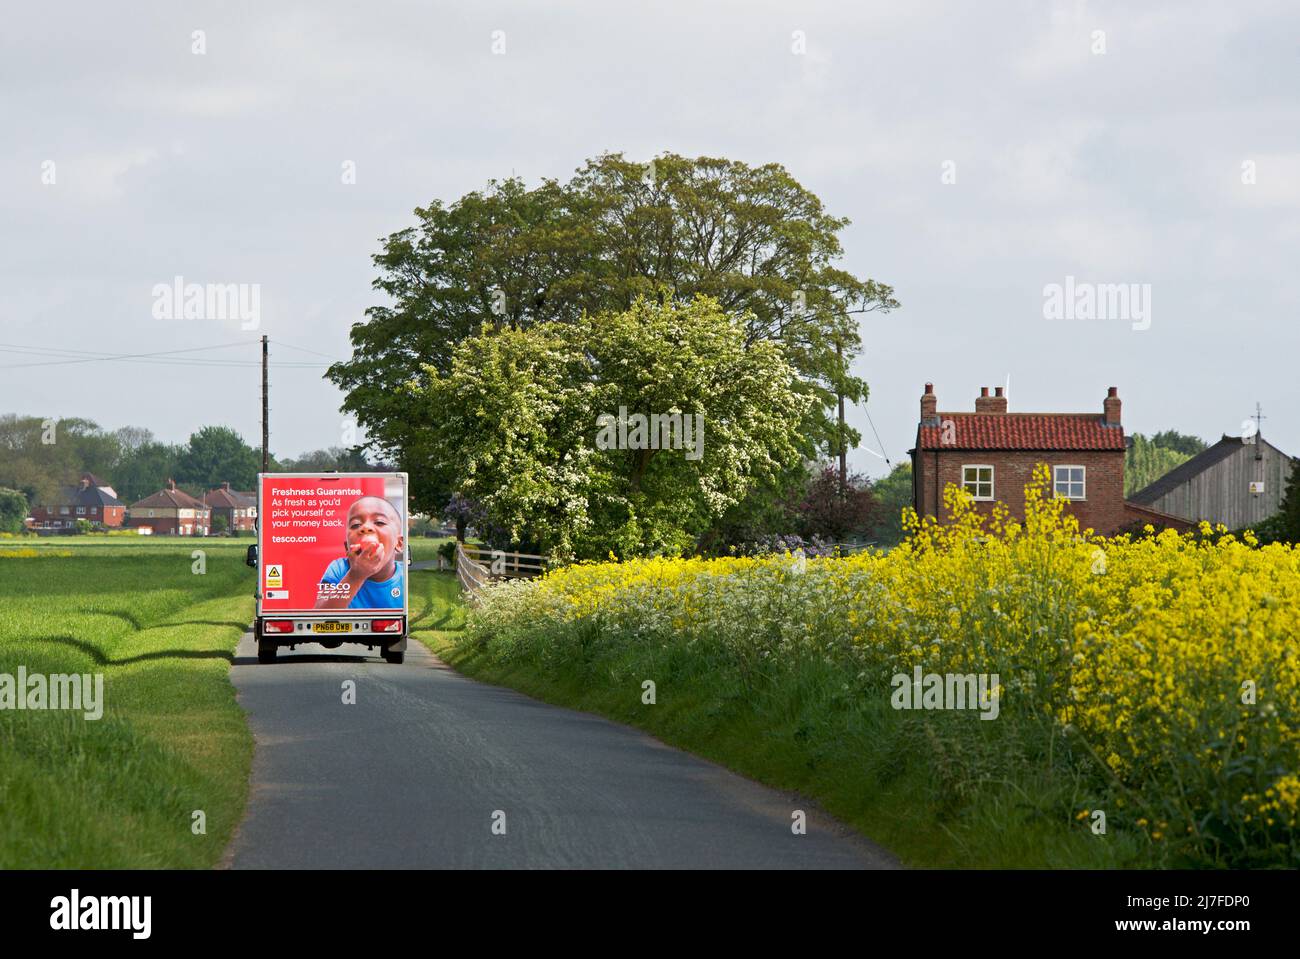 Tesco delivery van, house and farmland near Reedness, East Yorkshire, England UK Stock Photo